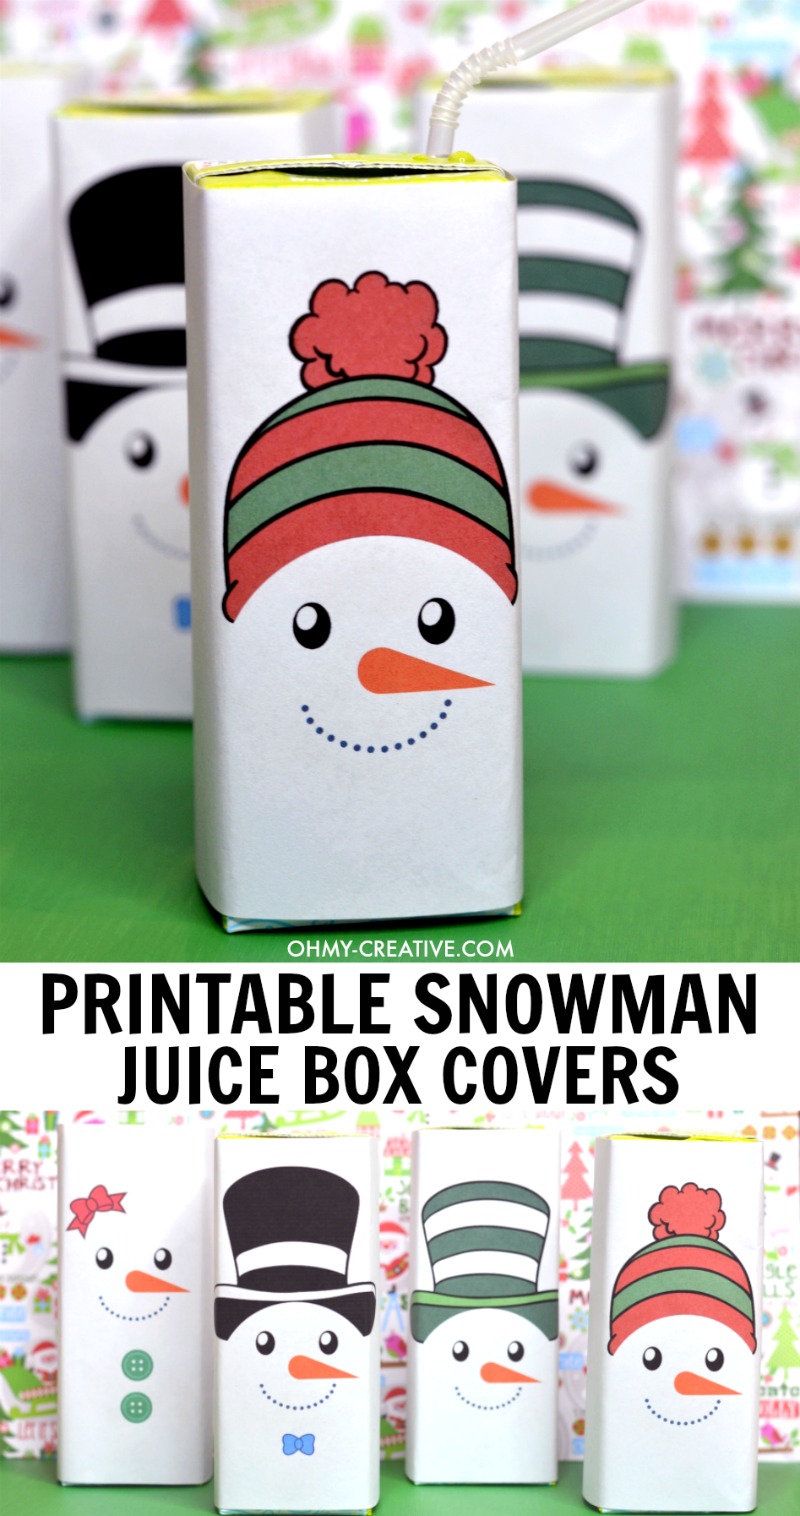 These Free Snowman Juice Box Covers Printables include four adorable designs. Perfect for winter parties or Christmas celebrations! OHMY-CREATIVE.COM #juiceboxcovers #snowmanprintables #christmasprintables #freeprintables #snowman #snowmanprintablesfreetemplet